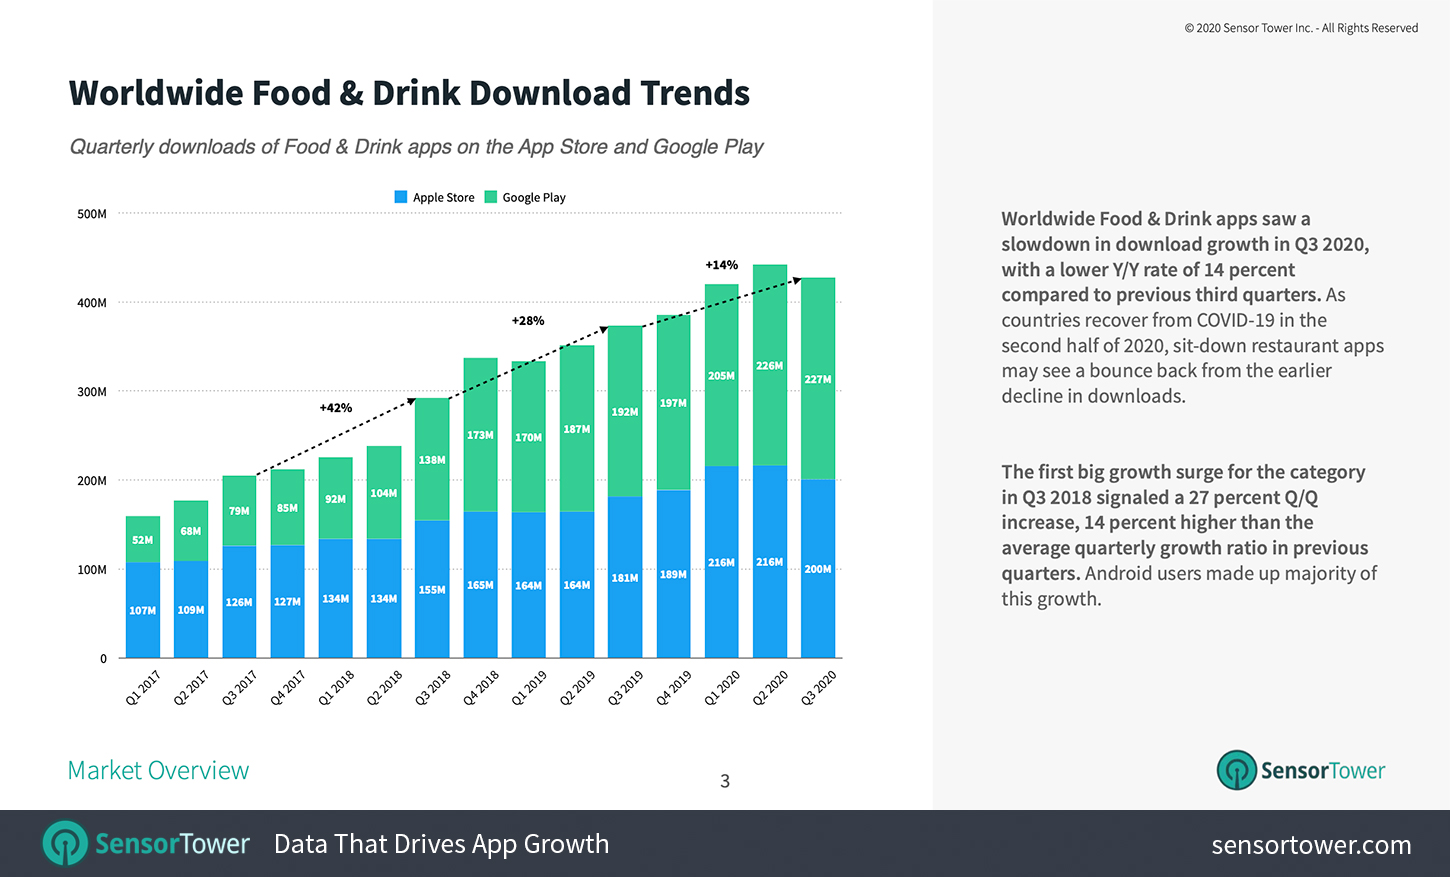 Chart showing overall worldwide app downloads for Food & Drink app downloads in the App Store and Google Play